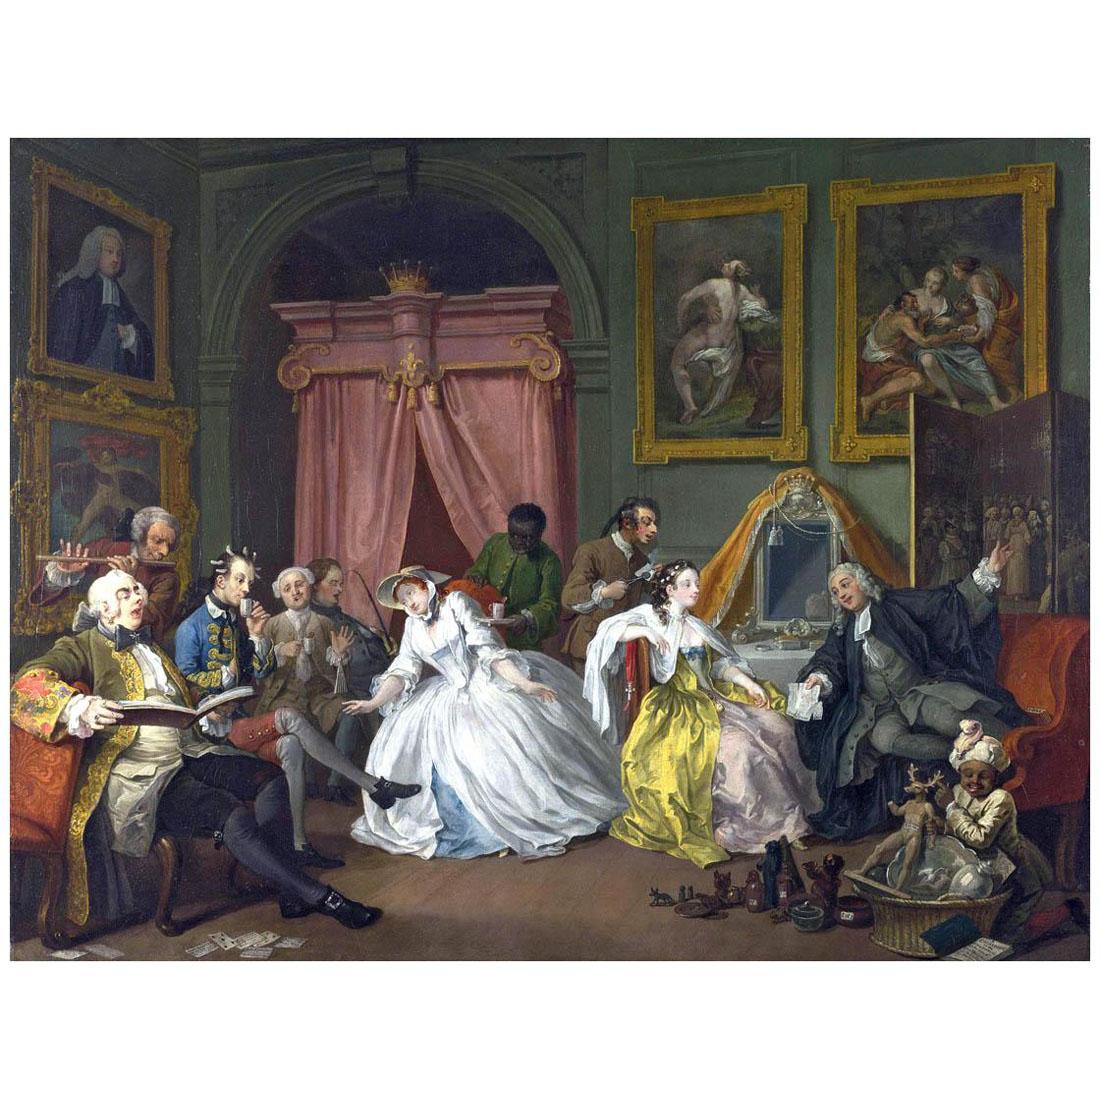 William Hogarth. Marriage A-la-Mode #6. The Lady’s Death. 1743. National Gallery, London